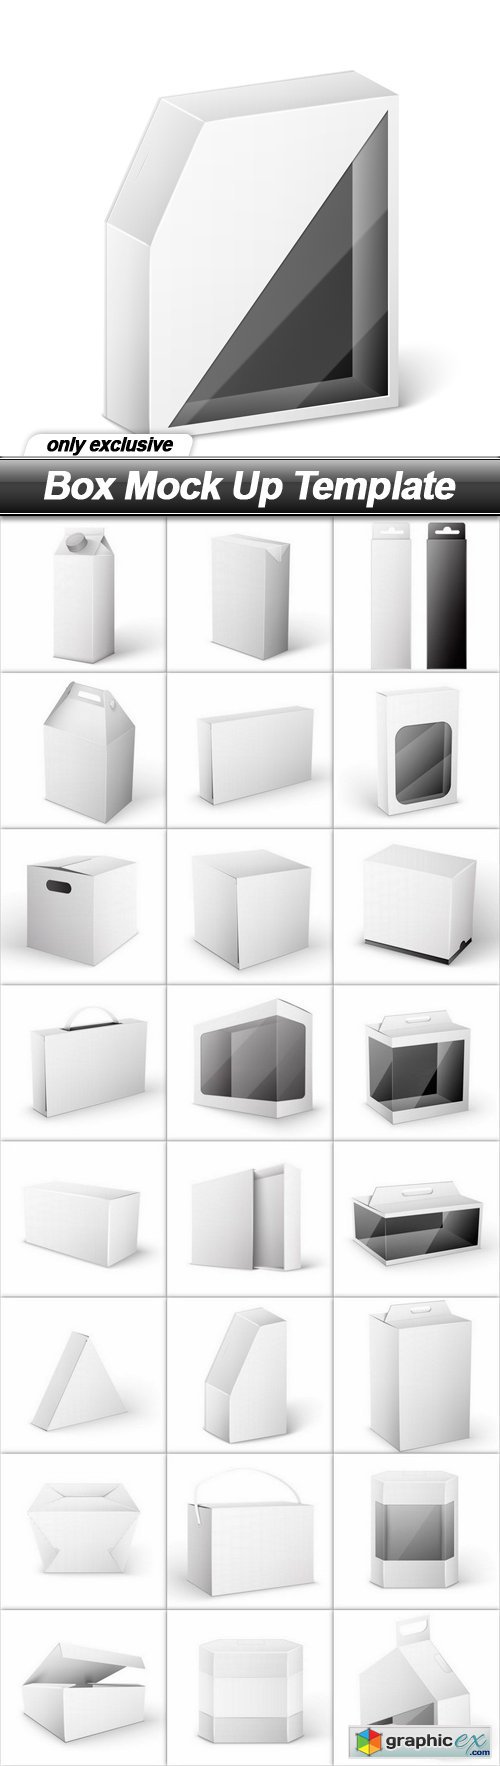 Box Mock Up Template - 25 EPS